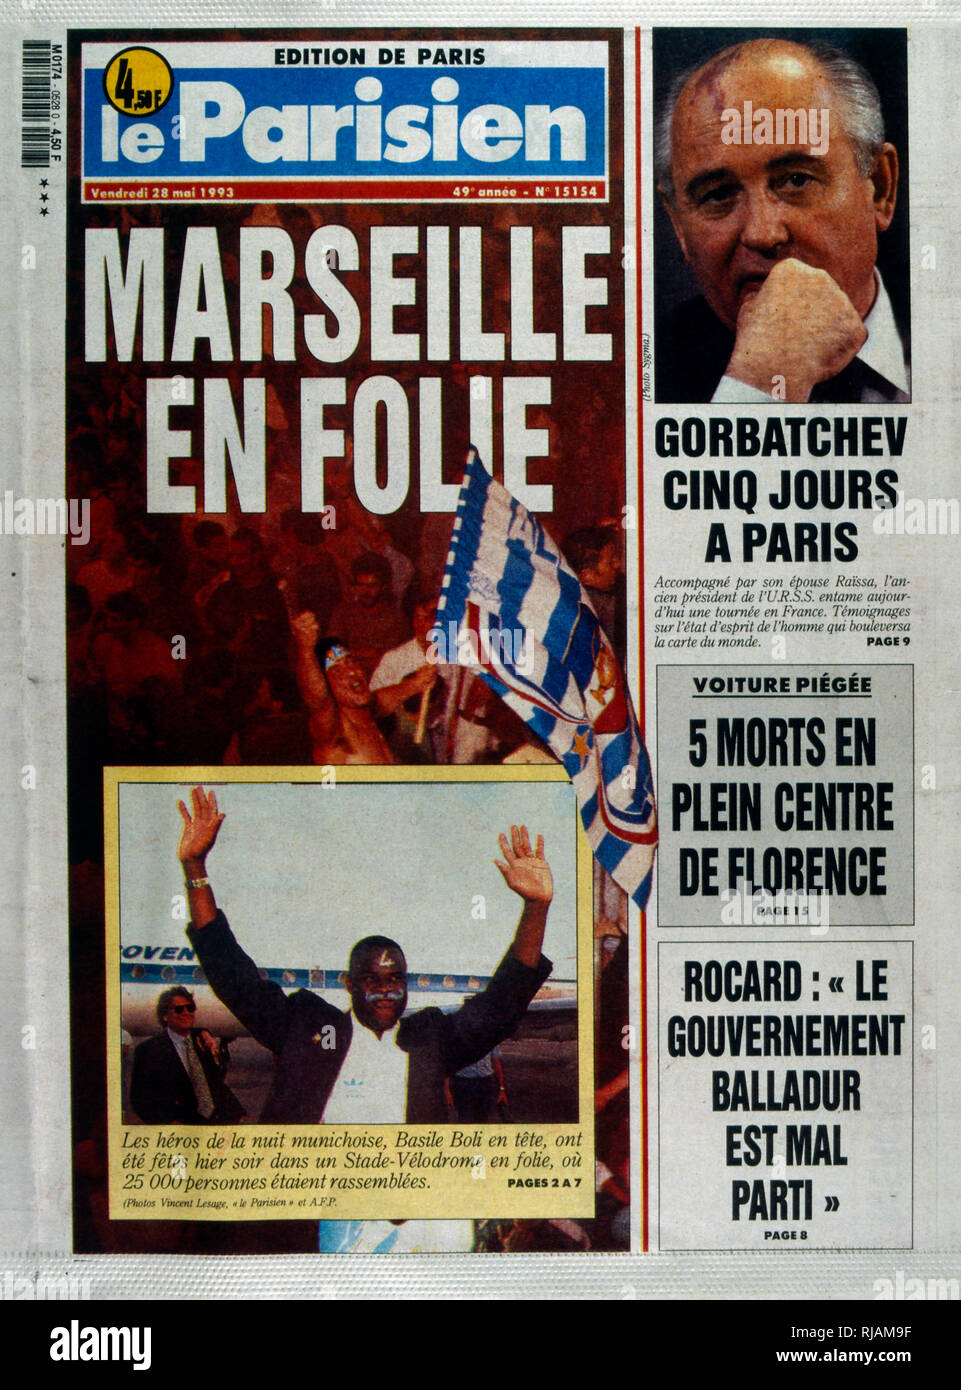 French publication 'Le Parisien' reporting the Marseilles Football club winning the UEFA Champions League in 1993. The highlight of the Marseilles football club's history was winning the new format UEFA Champions League in 1993. Basile Boli scored the only goal against Italy's Milan in the final held in Munich's Olympic Stadium. This triumph, however, was followed by a decade of decline. In 1994, due to financial irregularities and a match fixing scandal involving then president Bernard Tapie Stock Photo